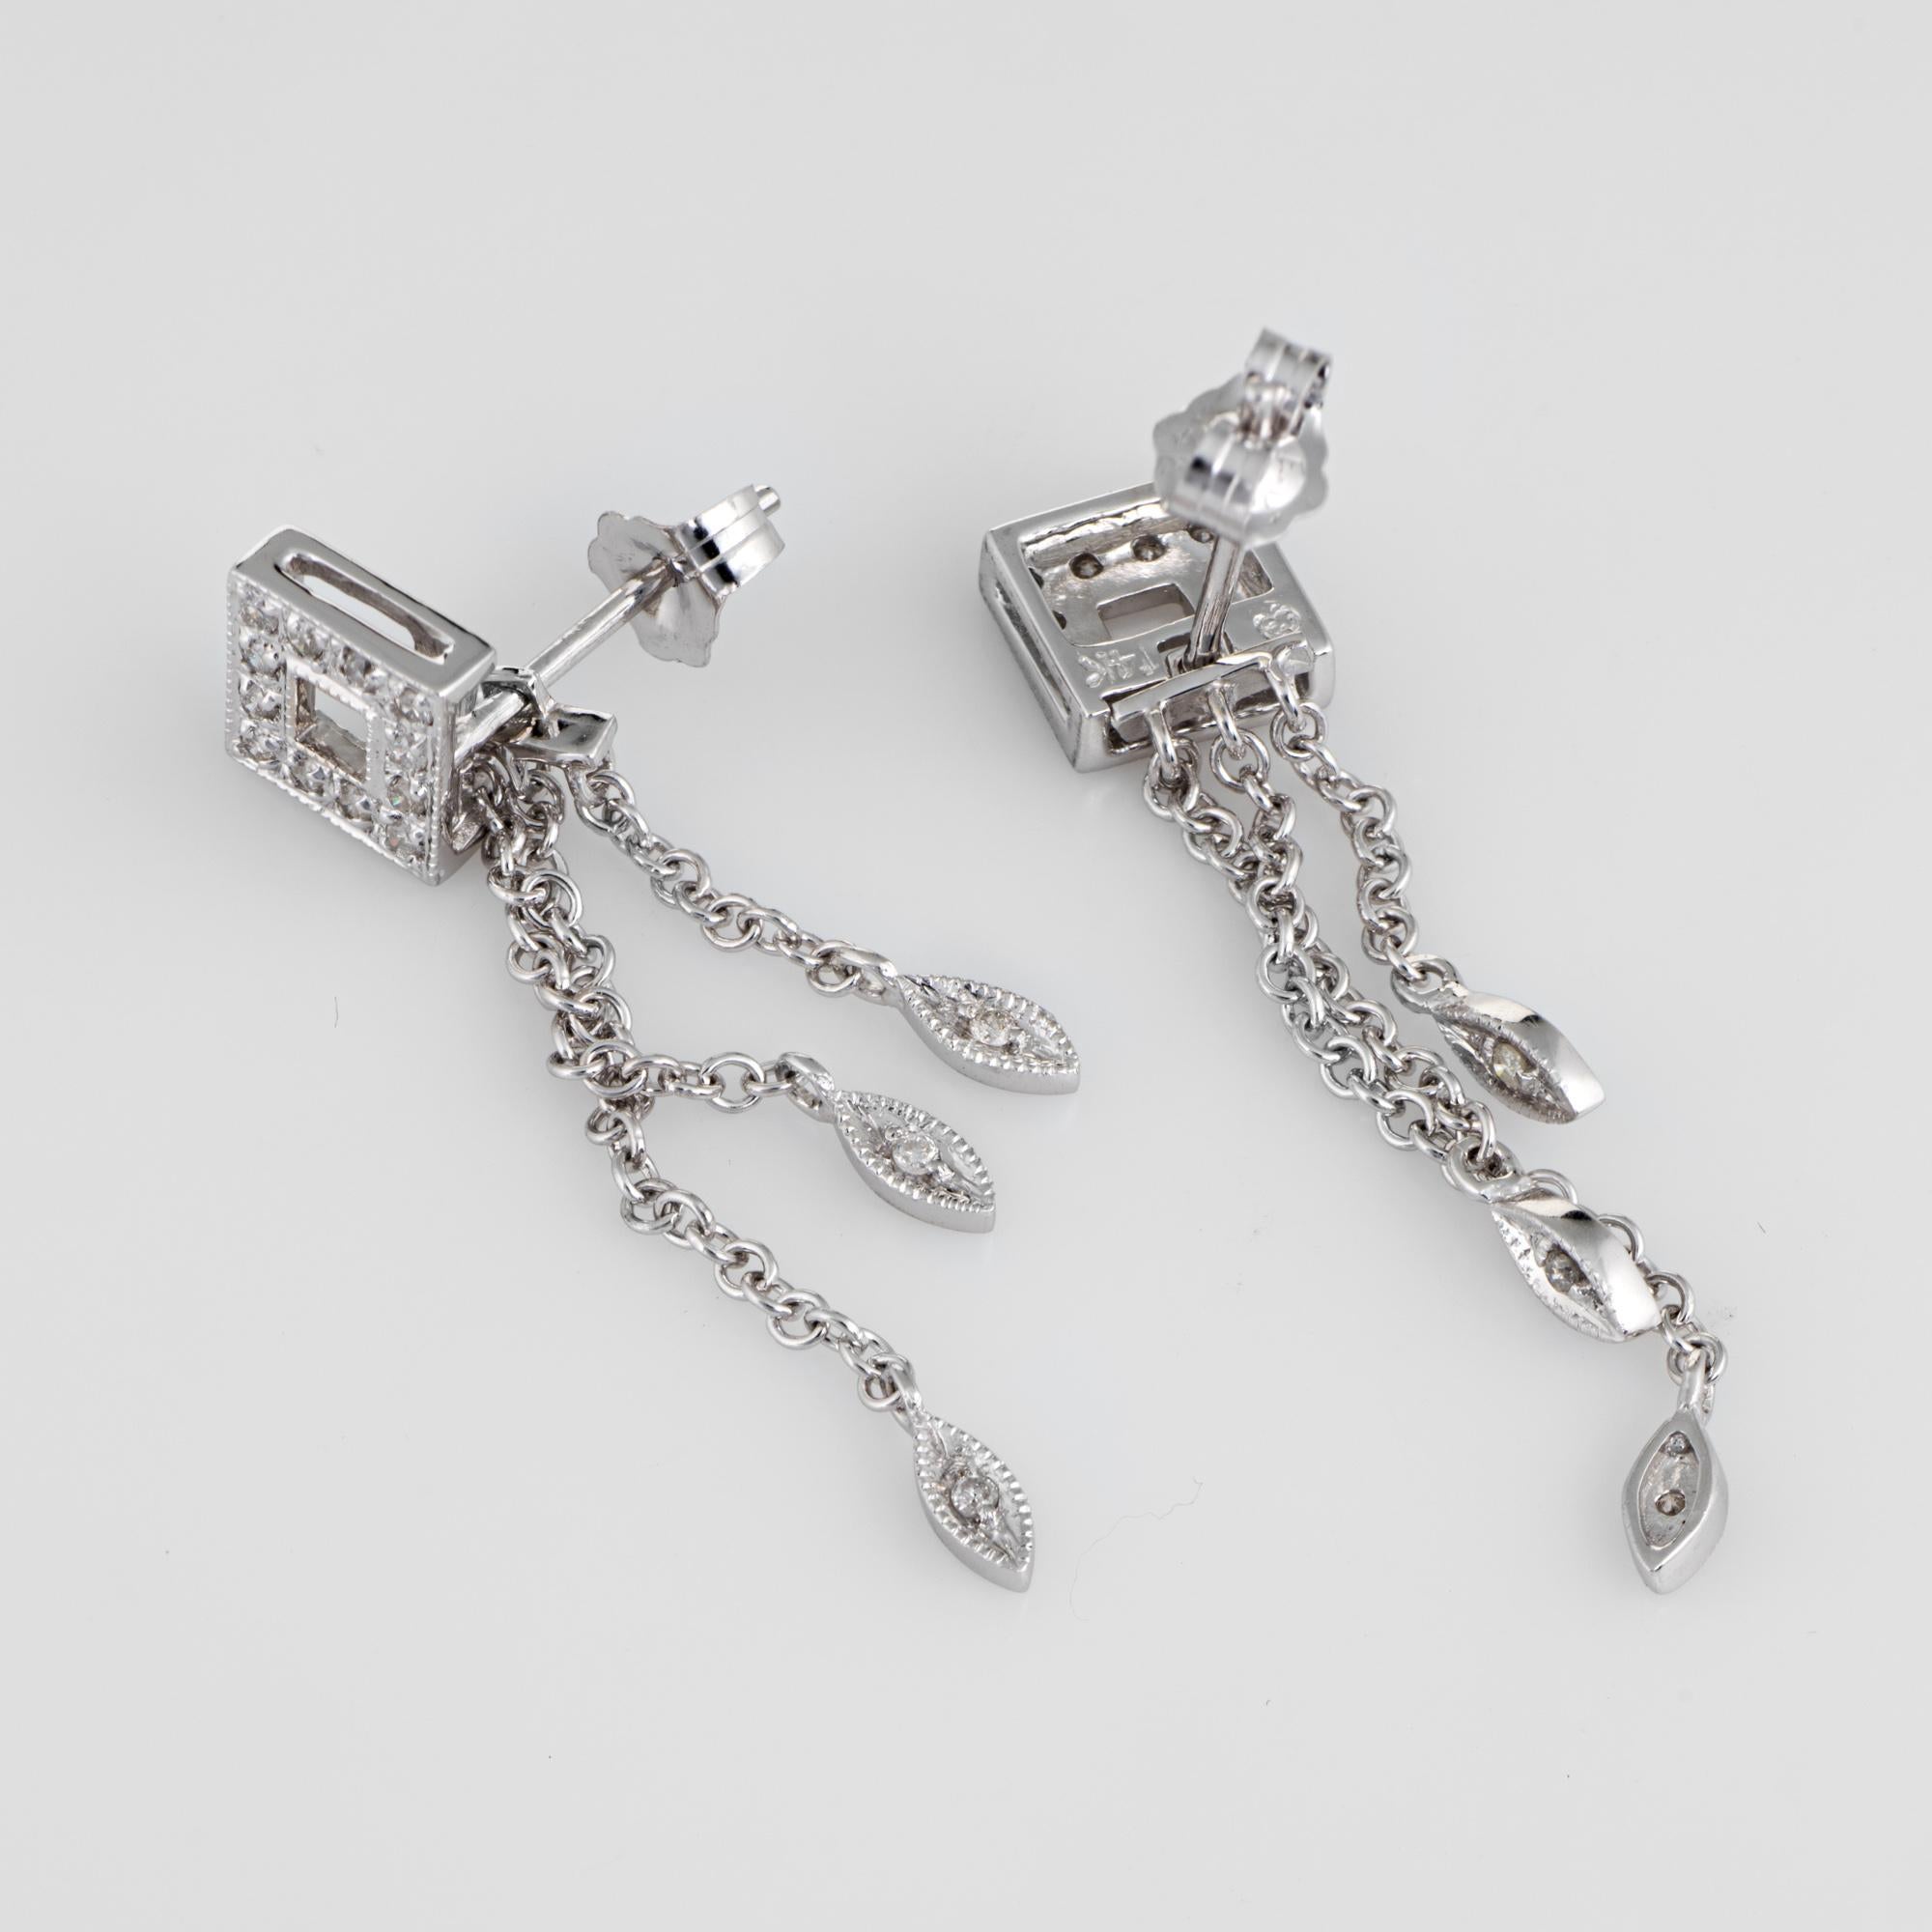 Elegant pair of estate diamond fringe drop earrings crafted in 14k white gold. 

Thirty round brilliant cut diamonds total an estimated 0.15 carats (estimated at H-I color and SI2-I1 clarity). 

The stylish earrings feature removable fringe drops.